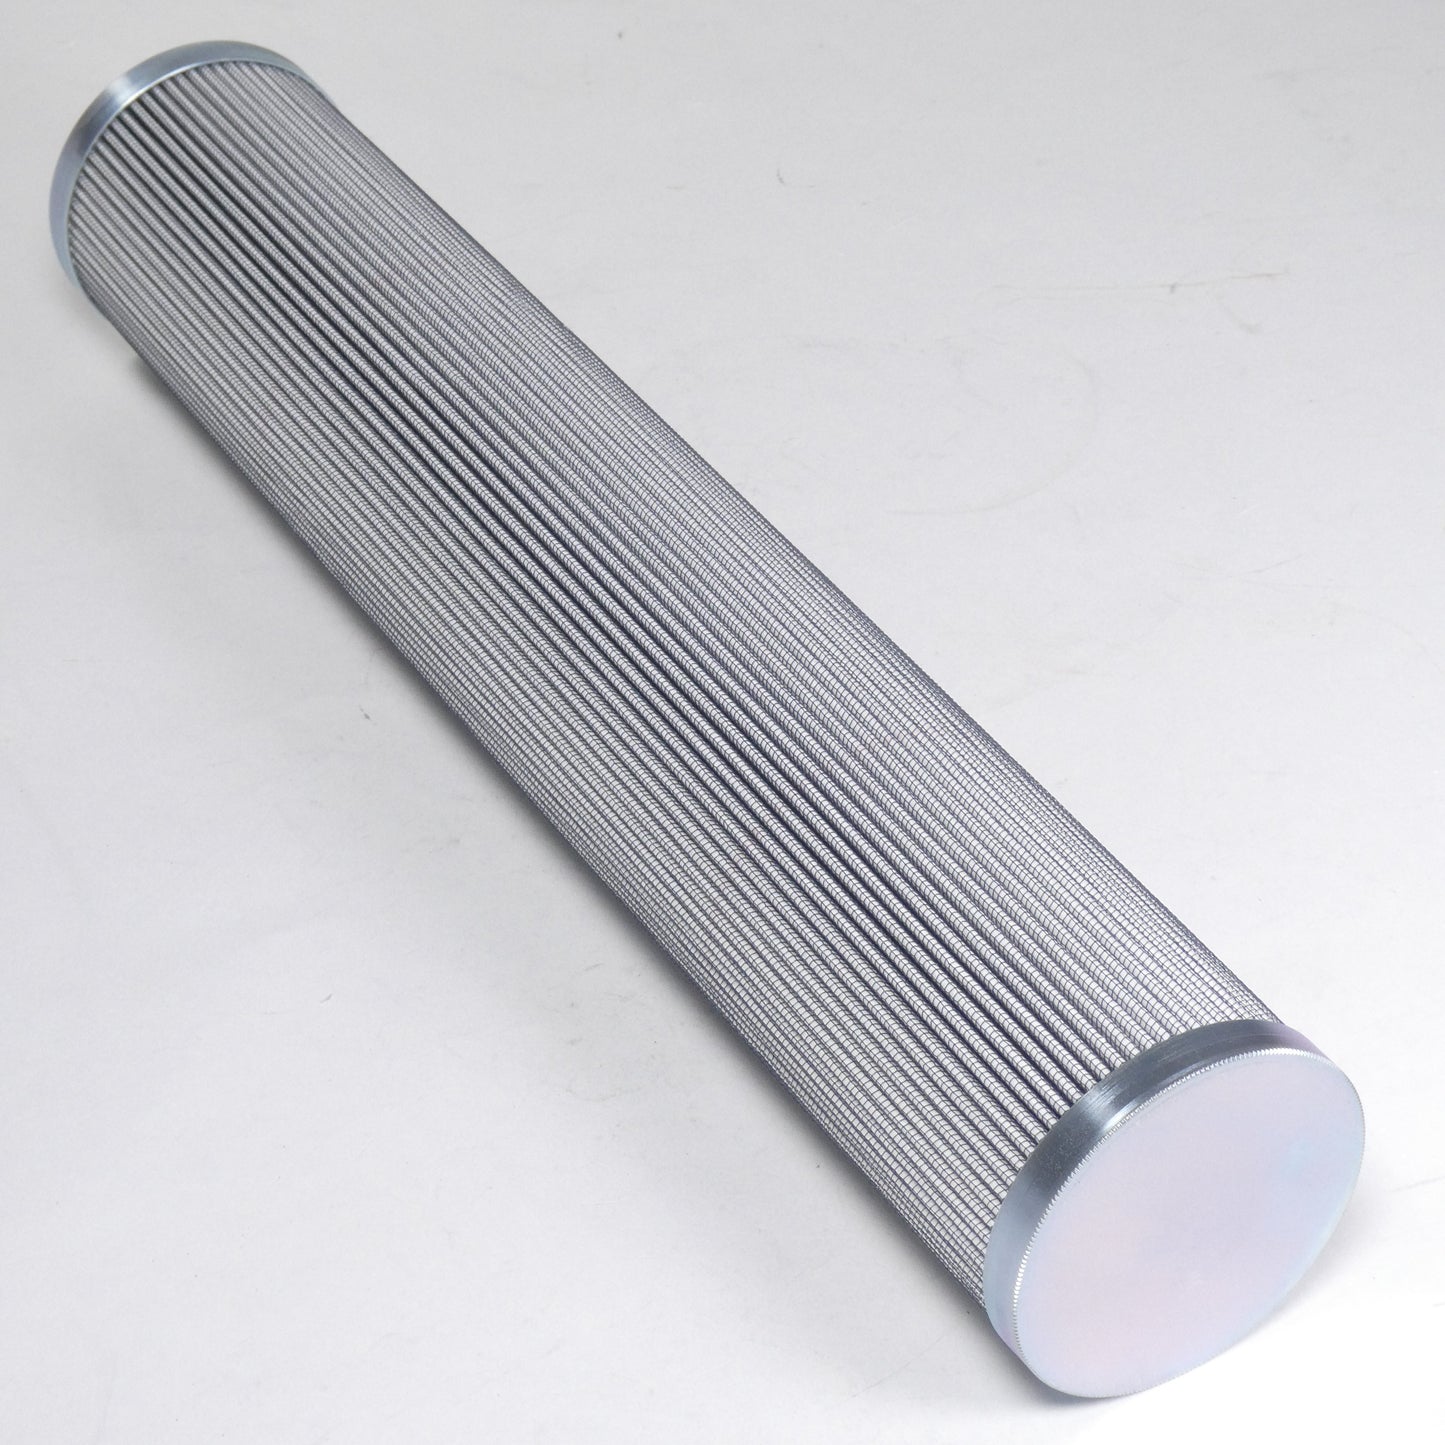 Hydrafil Replacement Filter Element for Pall HC9601FDP21JY806